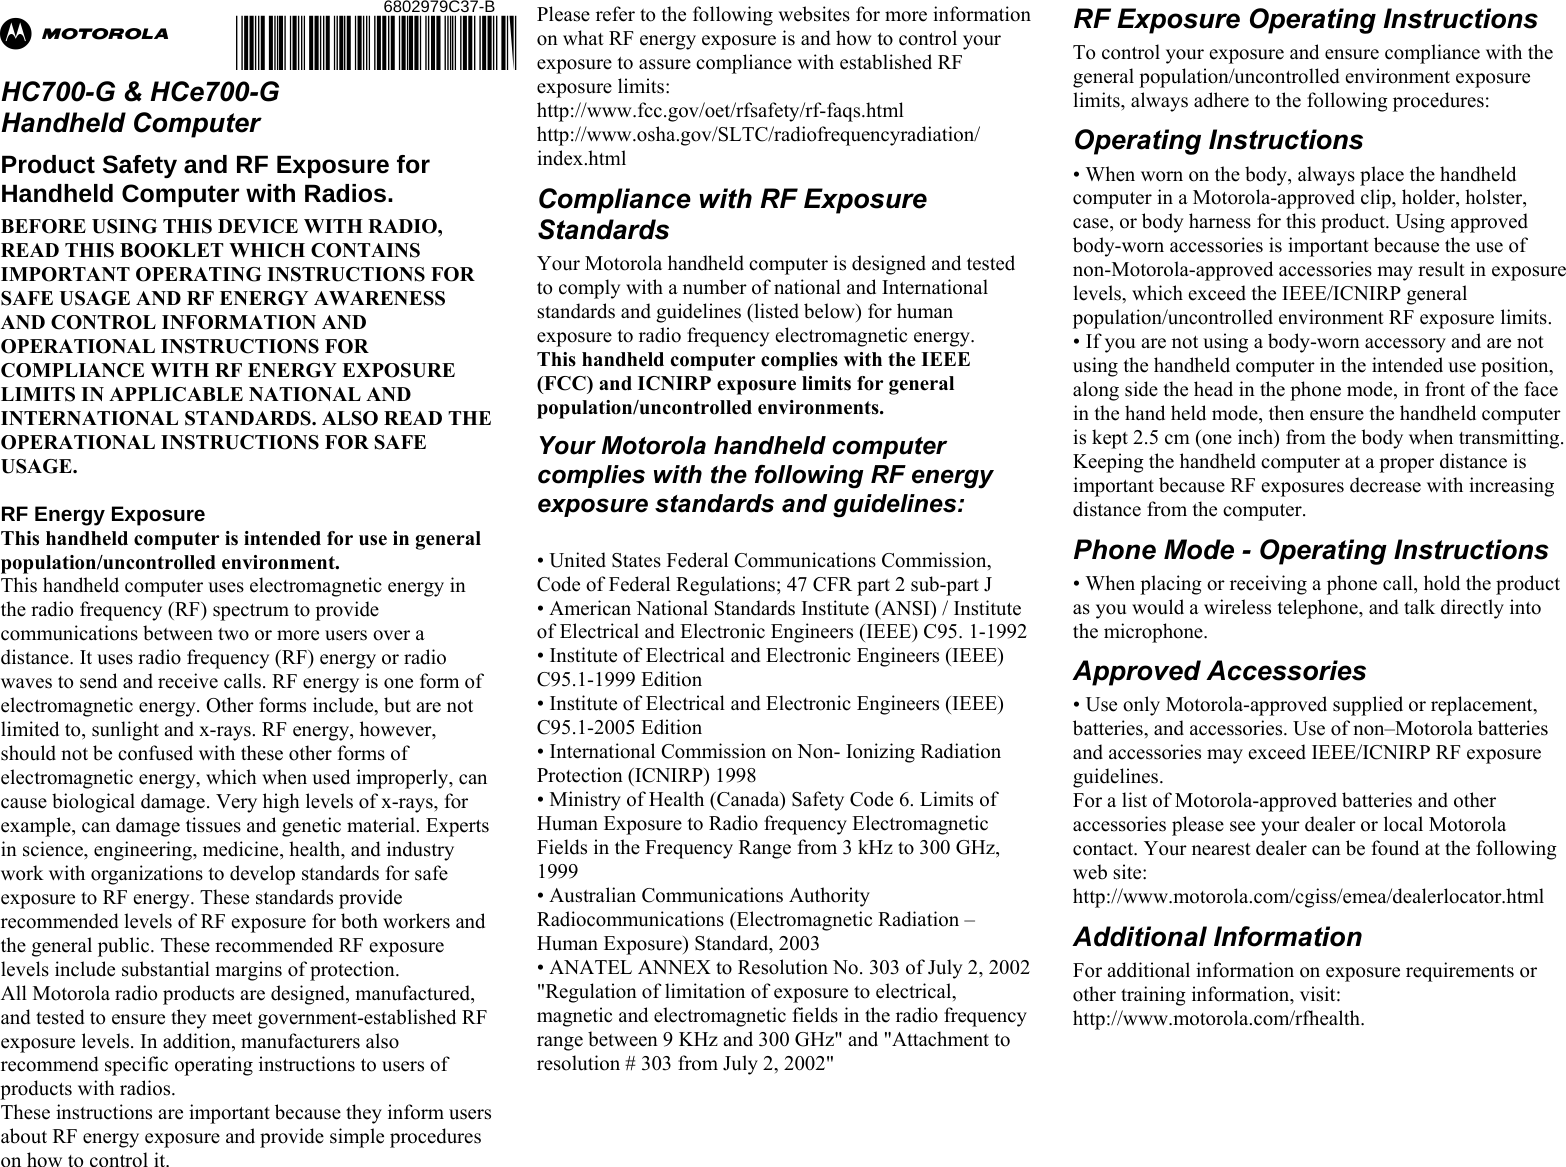 Ab  HC700-G &amp; HCe700-G  Handheld Computer Product Safety and RF Exposure for Handheld Computer with Radios. BEFORE USING THIS DEVICE WITH RADIO, READ THIS BOOKLET WHICH CONTAINS IMPORTANT OPERATING INSTRUCTIONS FOR SAFE USAGE AND RF ENERGY AWARENESS AND CONTROL INFORMATION AND OPERATIONAL INSTRUCTIONS FOR COMPLIANCE WITH RF ENERGY EXPOSURE LIMITS IN APPLICABLE NATIONAL AND INTERNATIONAL STANDARDS. ALSO READ THE OPERATIONAL INSTRUCTIONS FOR SAFE USAGE.   RF Energy Exposure  This handheld computer is intended for use in general population/uncontrolled environment. This handheld computer uses electromagnetic energy in the radio frequency (RF) spectrum to provide communications between two or more users over a distance. It uses radio frequency (RF) energy or radio waves to send and receive calls. RF energy is one form of electromagnetic energy. Other forms include, but are not limited to, sunlight and x-rays. RF energy, however, should not be confused with these other forms of electromagnetic energy, which when used improperly, can cause biological damage. Very high levels of x-rays, for example, can damage tissues and genetic material. Experts in science, engineering, medicine, health, and industry work with organizations to develop standards for safe exposure to RF energy. These standards provide recommended levels of RF exposure for both workers and the general public. These recommended RF exposure levels include substantial margins of protection. All Motorola radio products are designed, manufactured, and tested to ensure they meet government-established RF exposure levels. In addition, manufacturers also recommend specific operating instructions to users of products with radios.  These instructions are important because they inform users about RF energy exposure and provide simple procedures on how to control it. Please refer to the following websites for more information on what RF energy exposure is and how to control your exposure to assure compliance with established RF exposure limits: http://www.fcc.gov/oet/rfsafety/rf-faqs.html http://www.osha.gov/SLTC/radiofrequencyradiation/ index.html Compliance with RF Exposure Standards Your Motorola handheld computer is designed and tested to comply with a number of national and International standards and guidelines (listed below) for human exposure to radio frequency electromagnetic energy.  This handheld computer complies with the IEEE (FCC) and ICNIRP exposure limits for general population/uncontrolled environments.  Your Motorola handheld computer complies with the following RF energy exposure standards and guidelines:  • United States Federal Communications Commission, Code of Federal Regulations; 47 CFR part 2 sub-part J • American National Standards Institute (ANSI) / Institute of Electrical and Electronic Engineers (IEEE) C95. 1-1992 • Institute of Electrical and Electronic Engineers (IEEE) C95.1-1999 Edition • Institute of Electrical and Electronic Engineers (IEEE) C95.1-2005 Edition • International Commission on Non- Ionizing Radiation Protection (ICNIRP) 1998 • Ministry of Health (Canada) Safety Code 6. Limits of Human Exposure to Radio frequency Electromagnetic Fields in the Frequency Range from 3 kHz to 300 GHz, 1999 • Australian Communications Authority Radiocommunications (Electromagnetic Radiation – Human Exposure) Standard, 2003 • ANATEL ANNEX to Resolution No. 303 of July 2, 2002 &quot;Regulation of limitation of exposure to electrical, magnetic and electromagnetic fields in the radio frequency range between 9 KHz and 300 GHz&quot; and &quot;Attachment to resolution # 303 from July 2, 2002&quot;   RF Exposure Operating Instructions  To control your exposure and ensure compliance with the general population/uncontrolled environment exposure limits, always adhere to the following procedures: Operating Instructions • When worn on the body, always place the handheld computer in a Motorola-approved clip, holder, holster, case, or body harness for this product. Using approved body-worn accessories is important because the use of non-Motorola-approved accessories may result in exposure levels, which exceed the IEEE/ICNIRP general population/uncontrolled environment RF exposure limits. • If you are not using a body-worn accessory and are not using the handheld computer in the intended use position, along side the head in the phone mode, in front of the face in the hand held mode, then ensure the handheld computer is kept 2.5 cm (one inch) from the body when transmitting. Keeping the handheld computer at a proper distance is important because RF exposures decrease with increasing distance from the computer. Phone Mode - Operating Instructions • When placing or receiving a phone call, hold the product as you would a wireless telephone, and talk directly into the microphone. Approved Accessories • Use only Motorola-approved supplied or replacement, batteries, and accessories. Use of non–Motorola batteries and accessories may exceed IEEE/ICNIRP RF exposure guidelines. For a list of Motorola-approved batteries and other accessories please see your dealer or local Motorola contact. Your nearest dealer can be found at the following web site: http://www.motorola.com/cgiss/emea/dealerlocator.html Additional Information For additional information on exposure requirements or other training information, visit: http://www.motorola.com/rfhealth.       6802979C37-B @6802979C37@ 